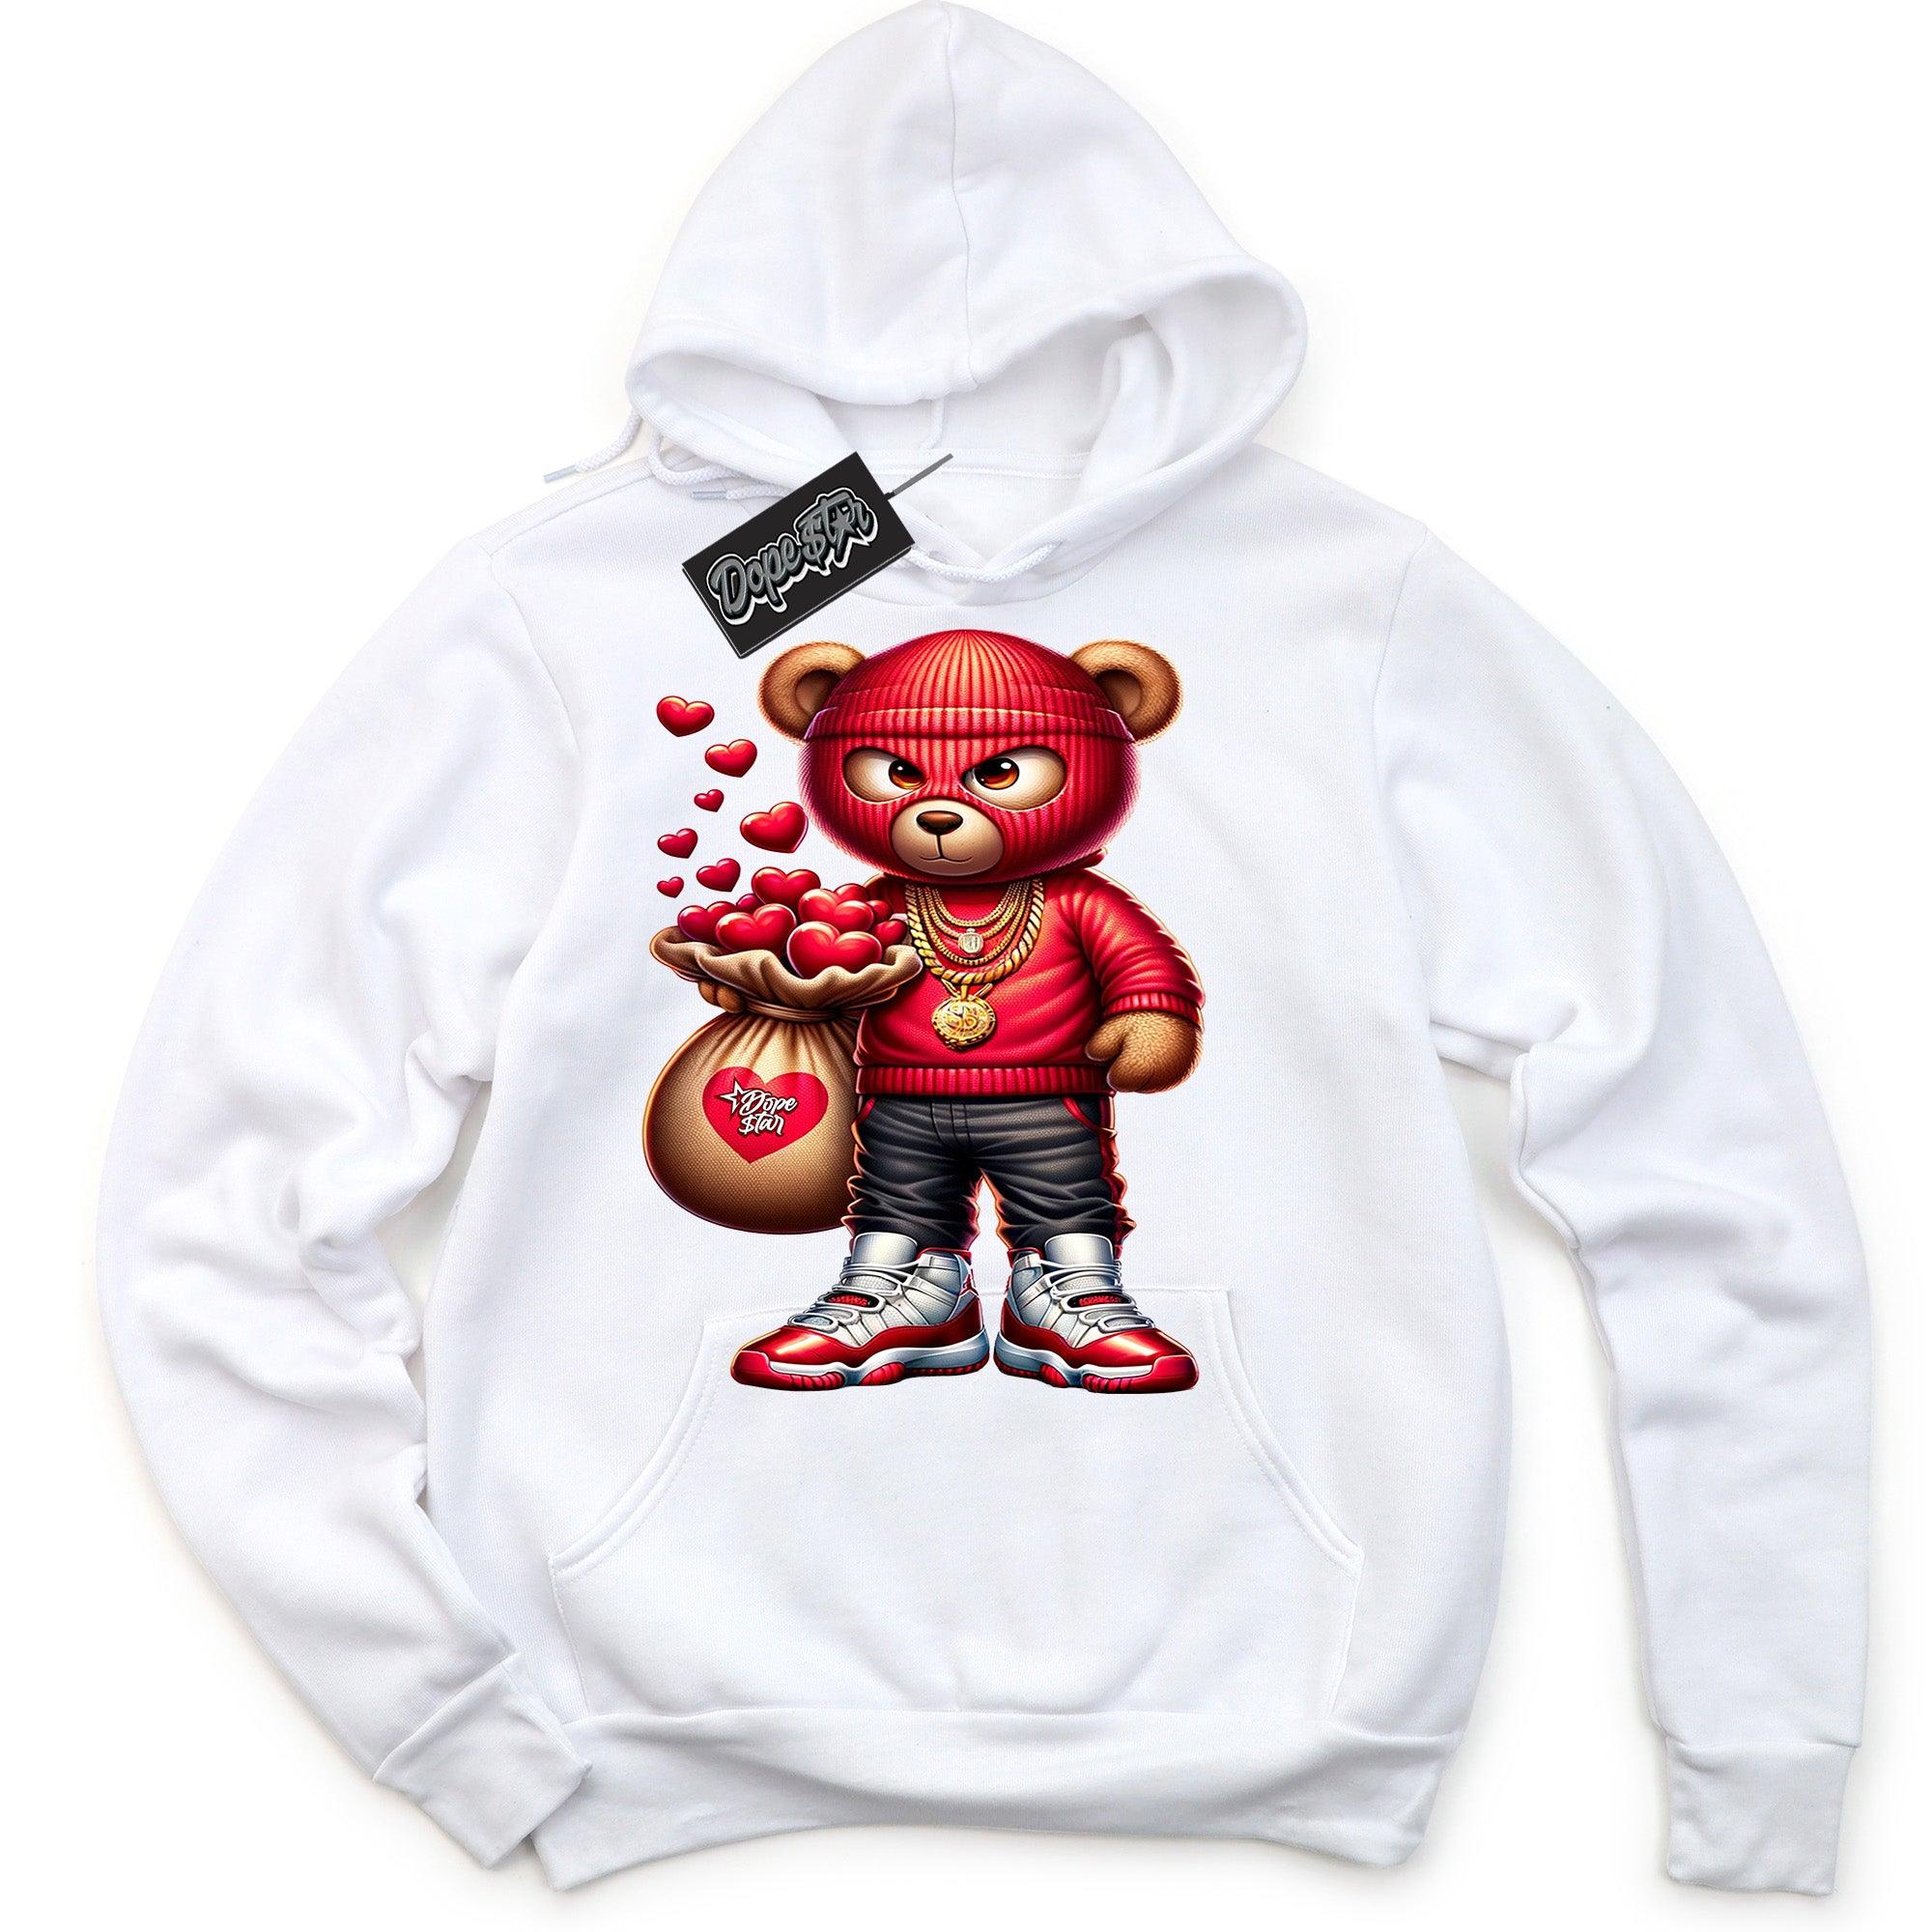 Cool White Graphic Hoodie with “ Valentine Thief “ print, that perfectly matches Air Jordan 11 Cherry sneakers